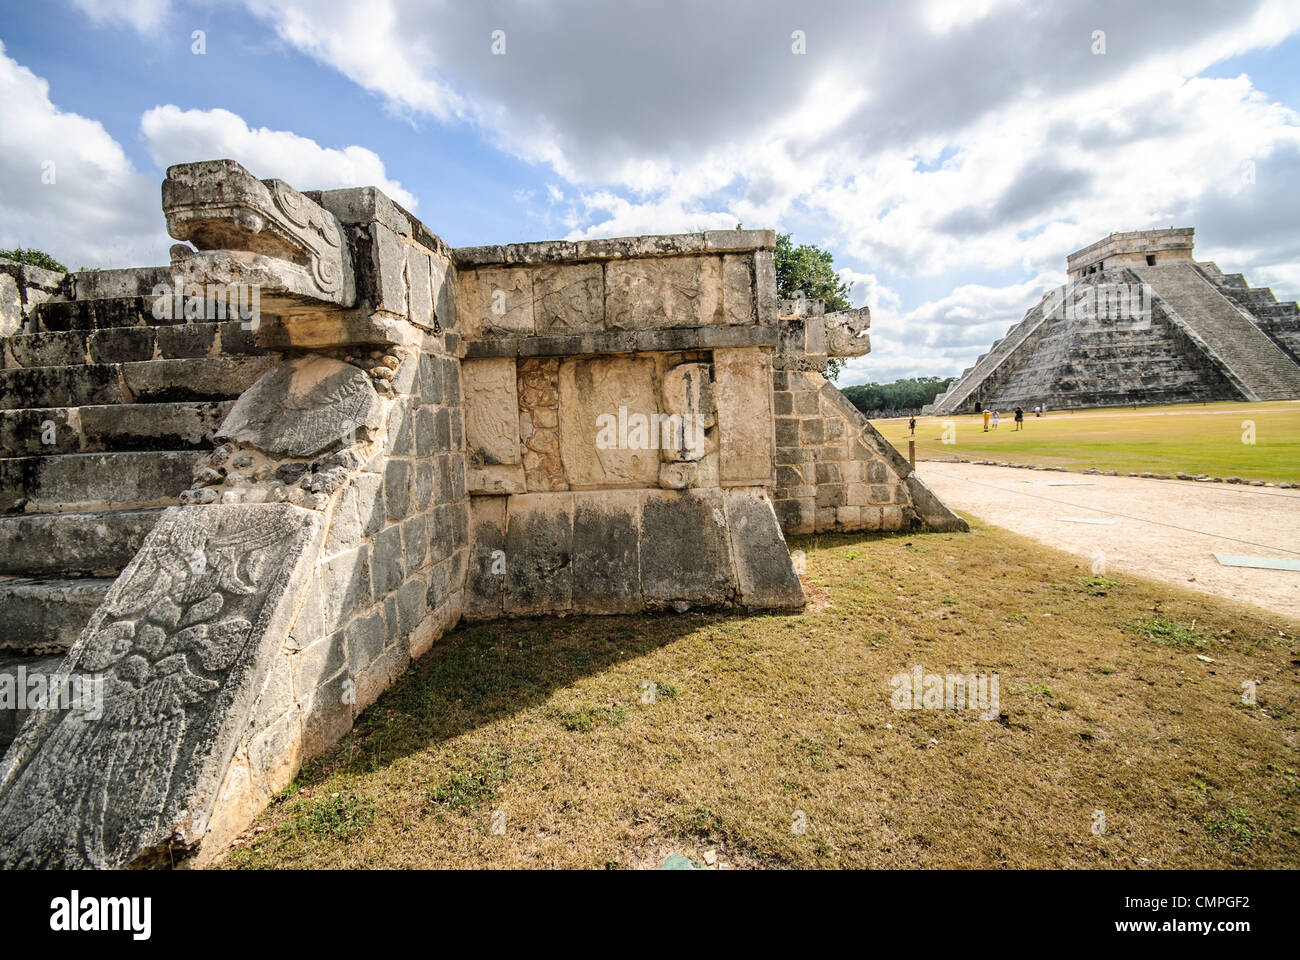 CHICHEN ITZA, Mexico - In the foreground is the Venus Platform, used for religious ceremonies, and in the background is the Temple of Kukulkan (El Castillo) at Chichen Itza Archeological Zone, ruins of a major Maya civilization city in the heart of Mexico's Yucatan Peninsula. Stock Photo